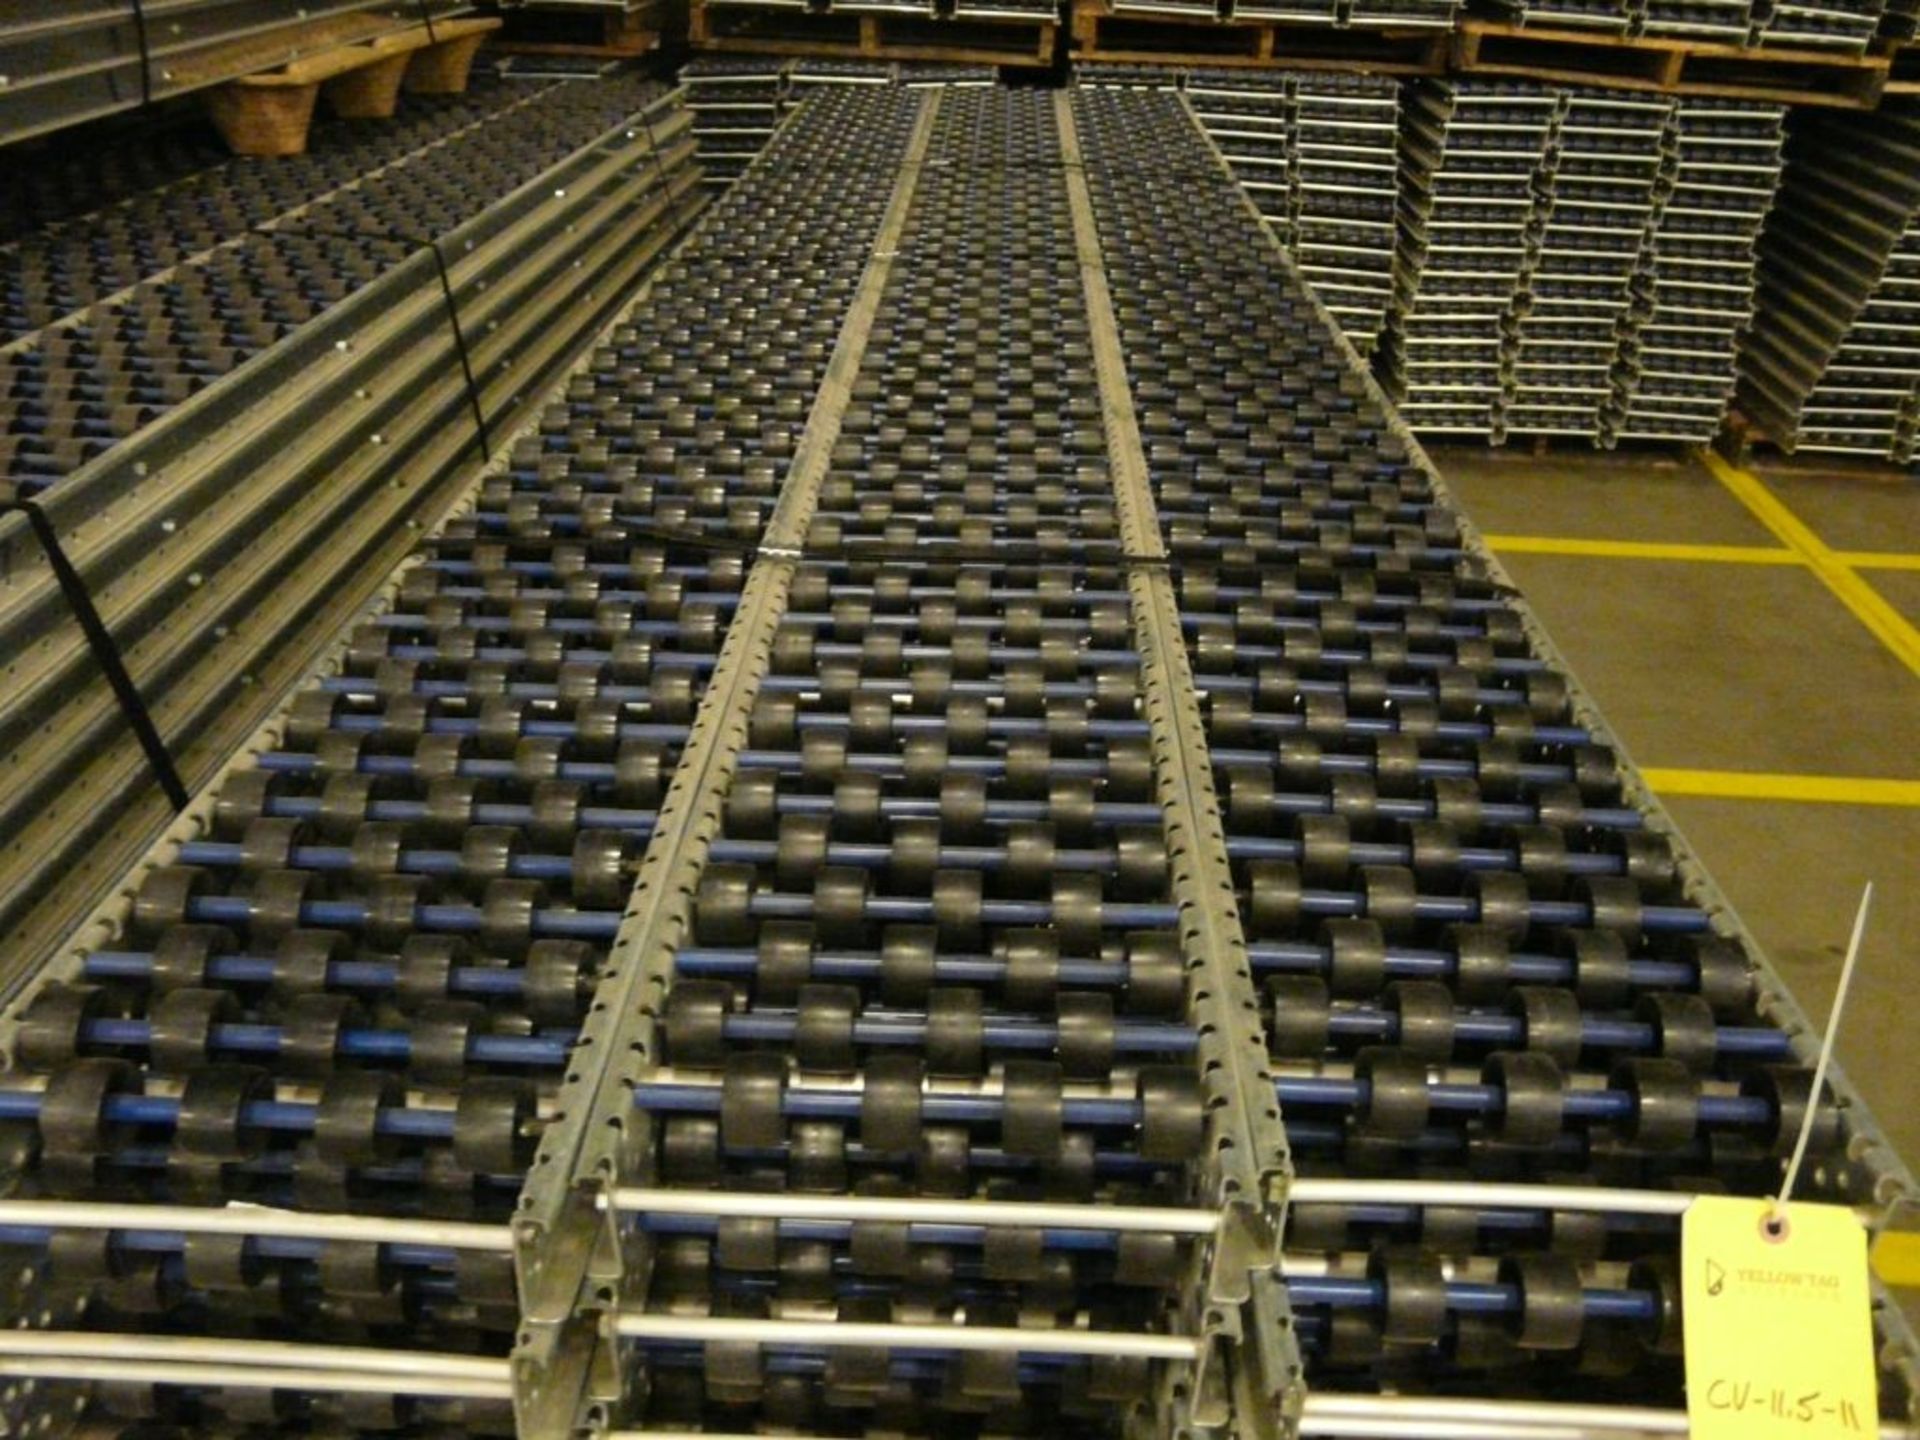 Lot of (90) SpanTrack Wheelbed Carton Flow Conveyors - 11.5'L x 11"W; Tag: 223624 - $30 Lot - Image 3 of 4